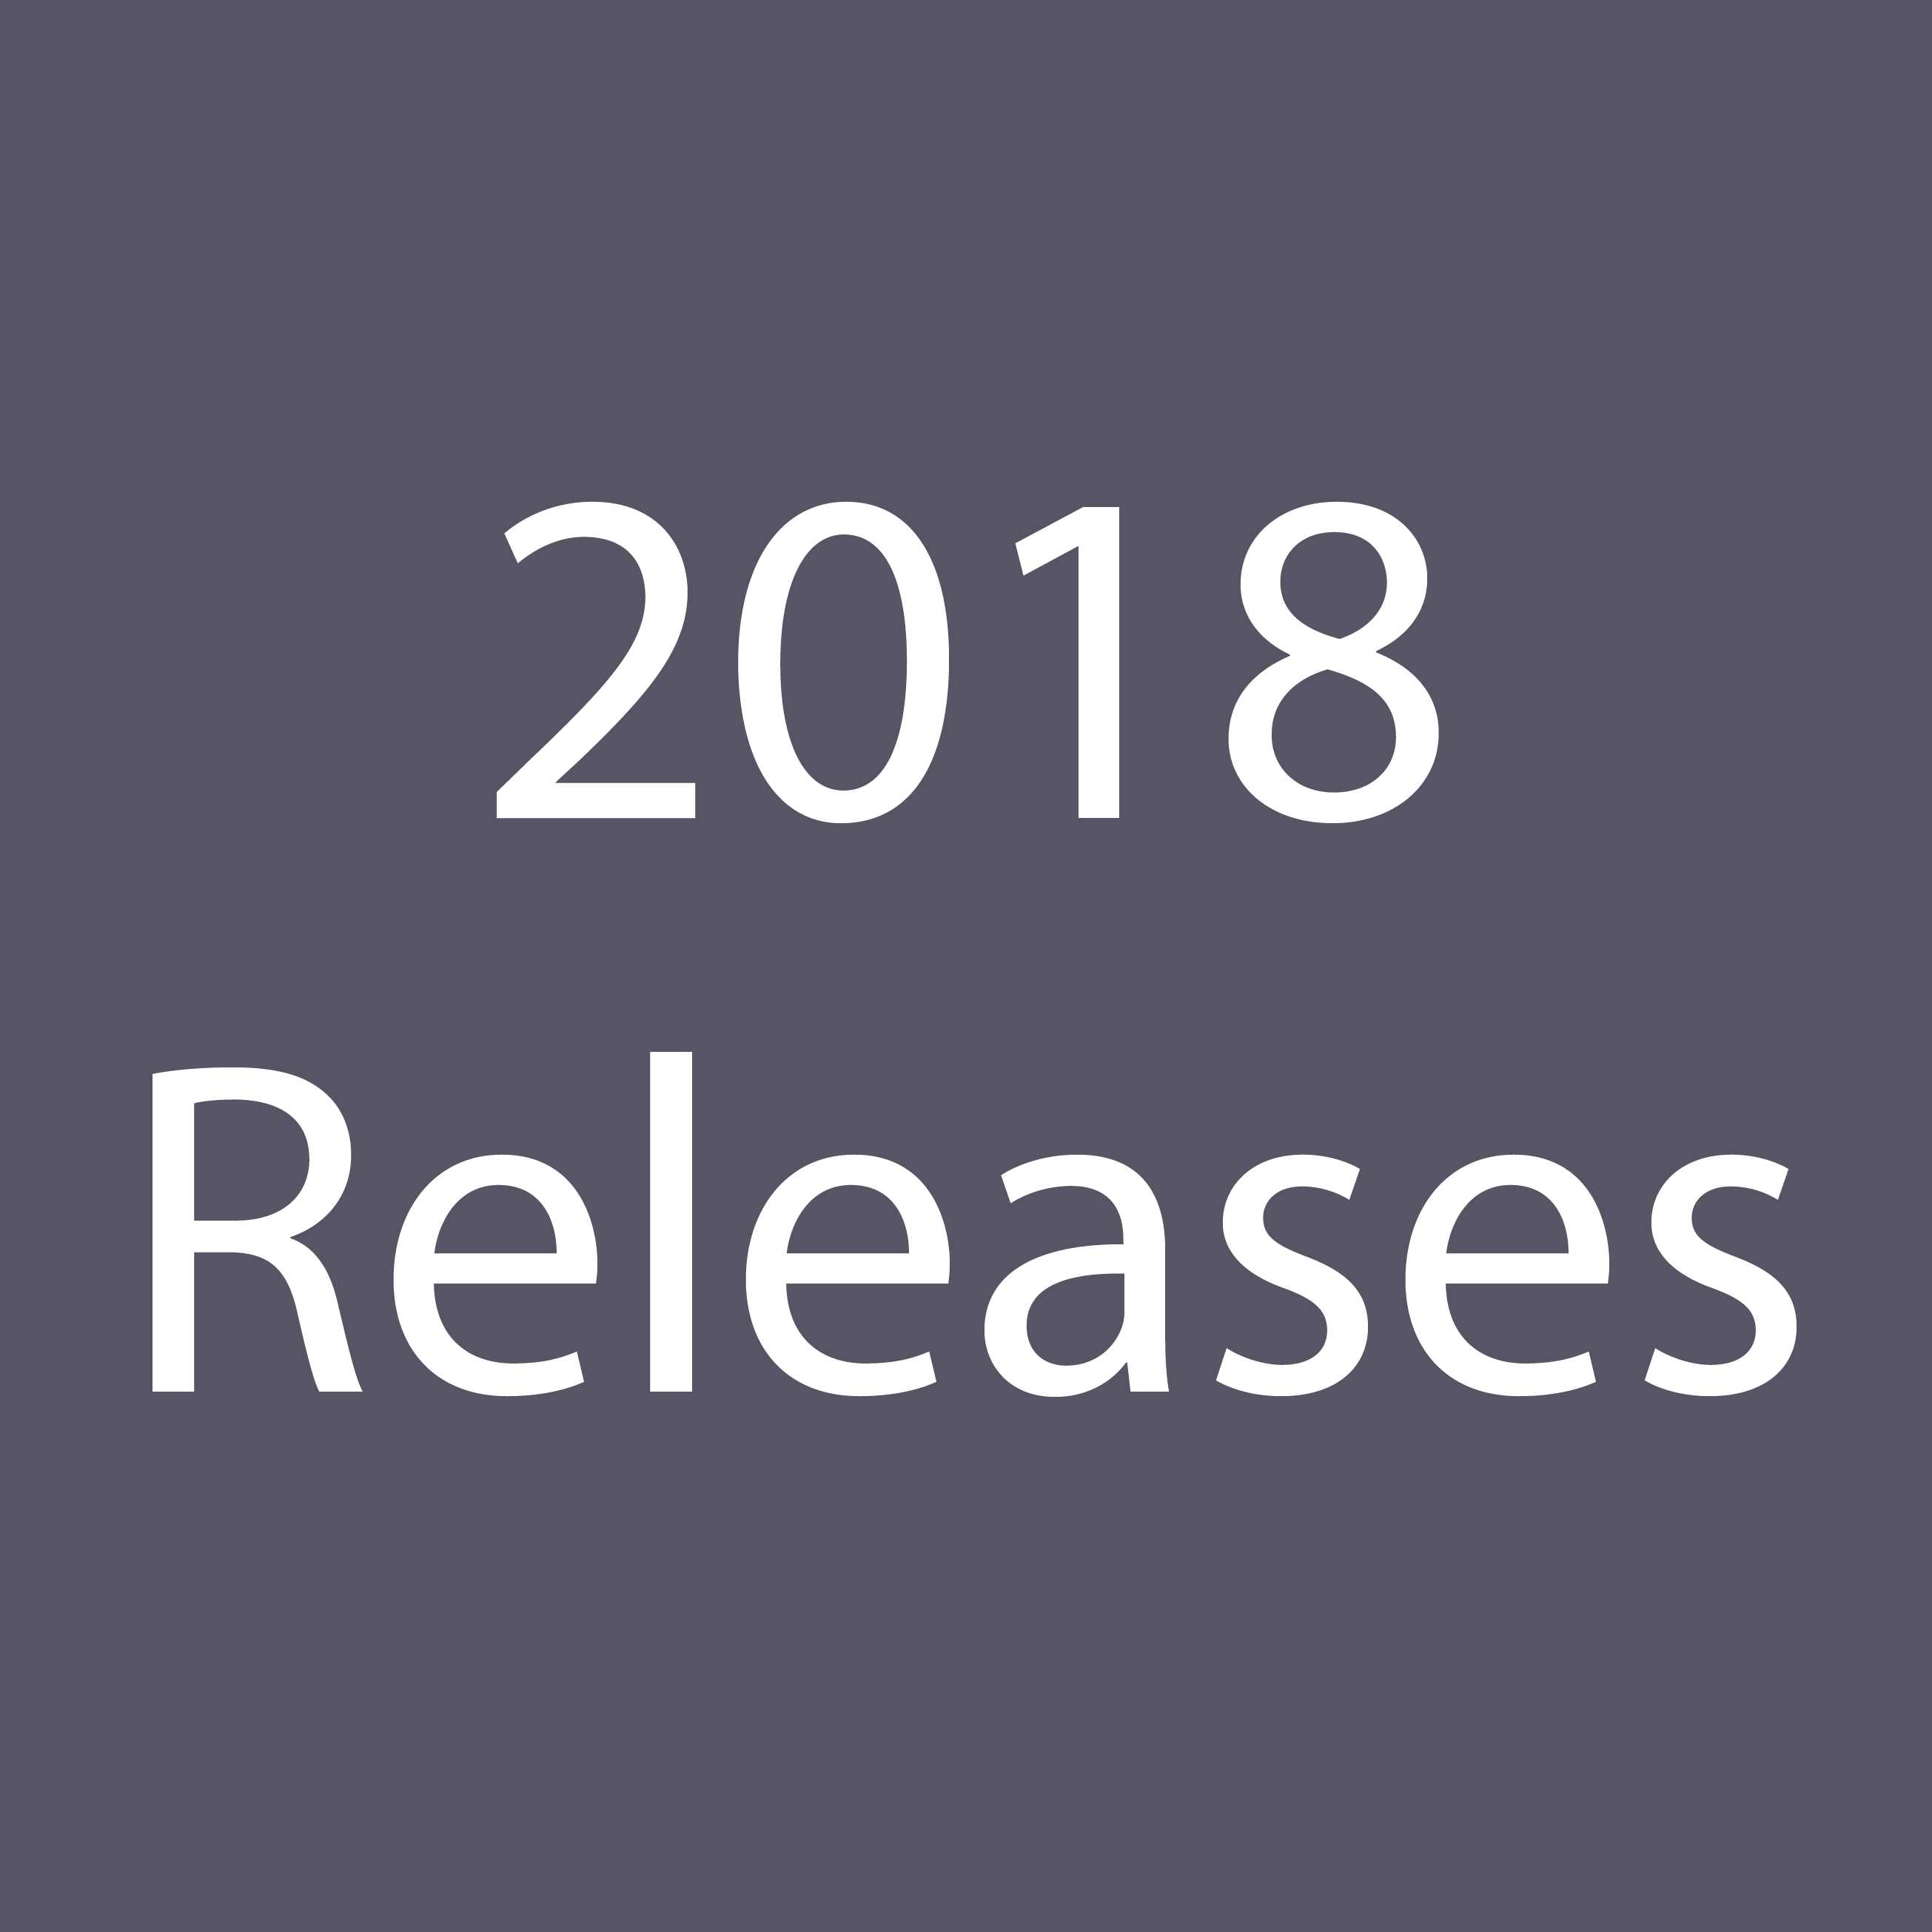 2018 Releases